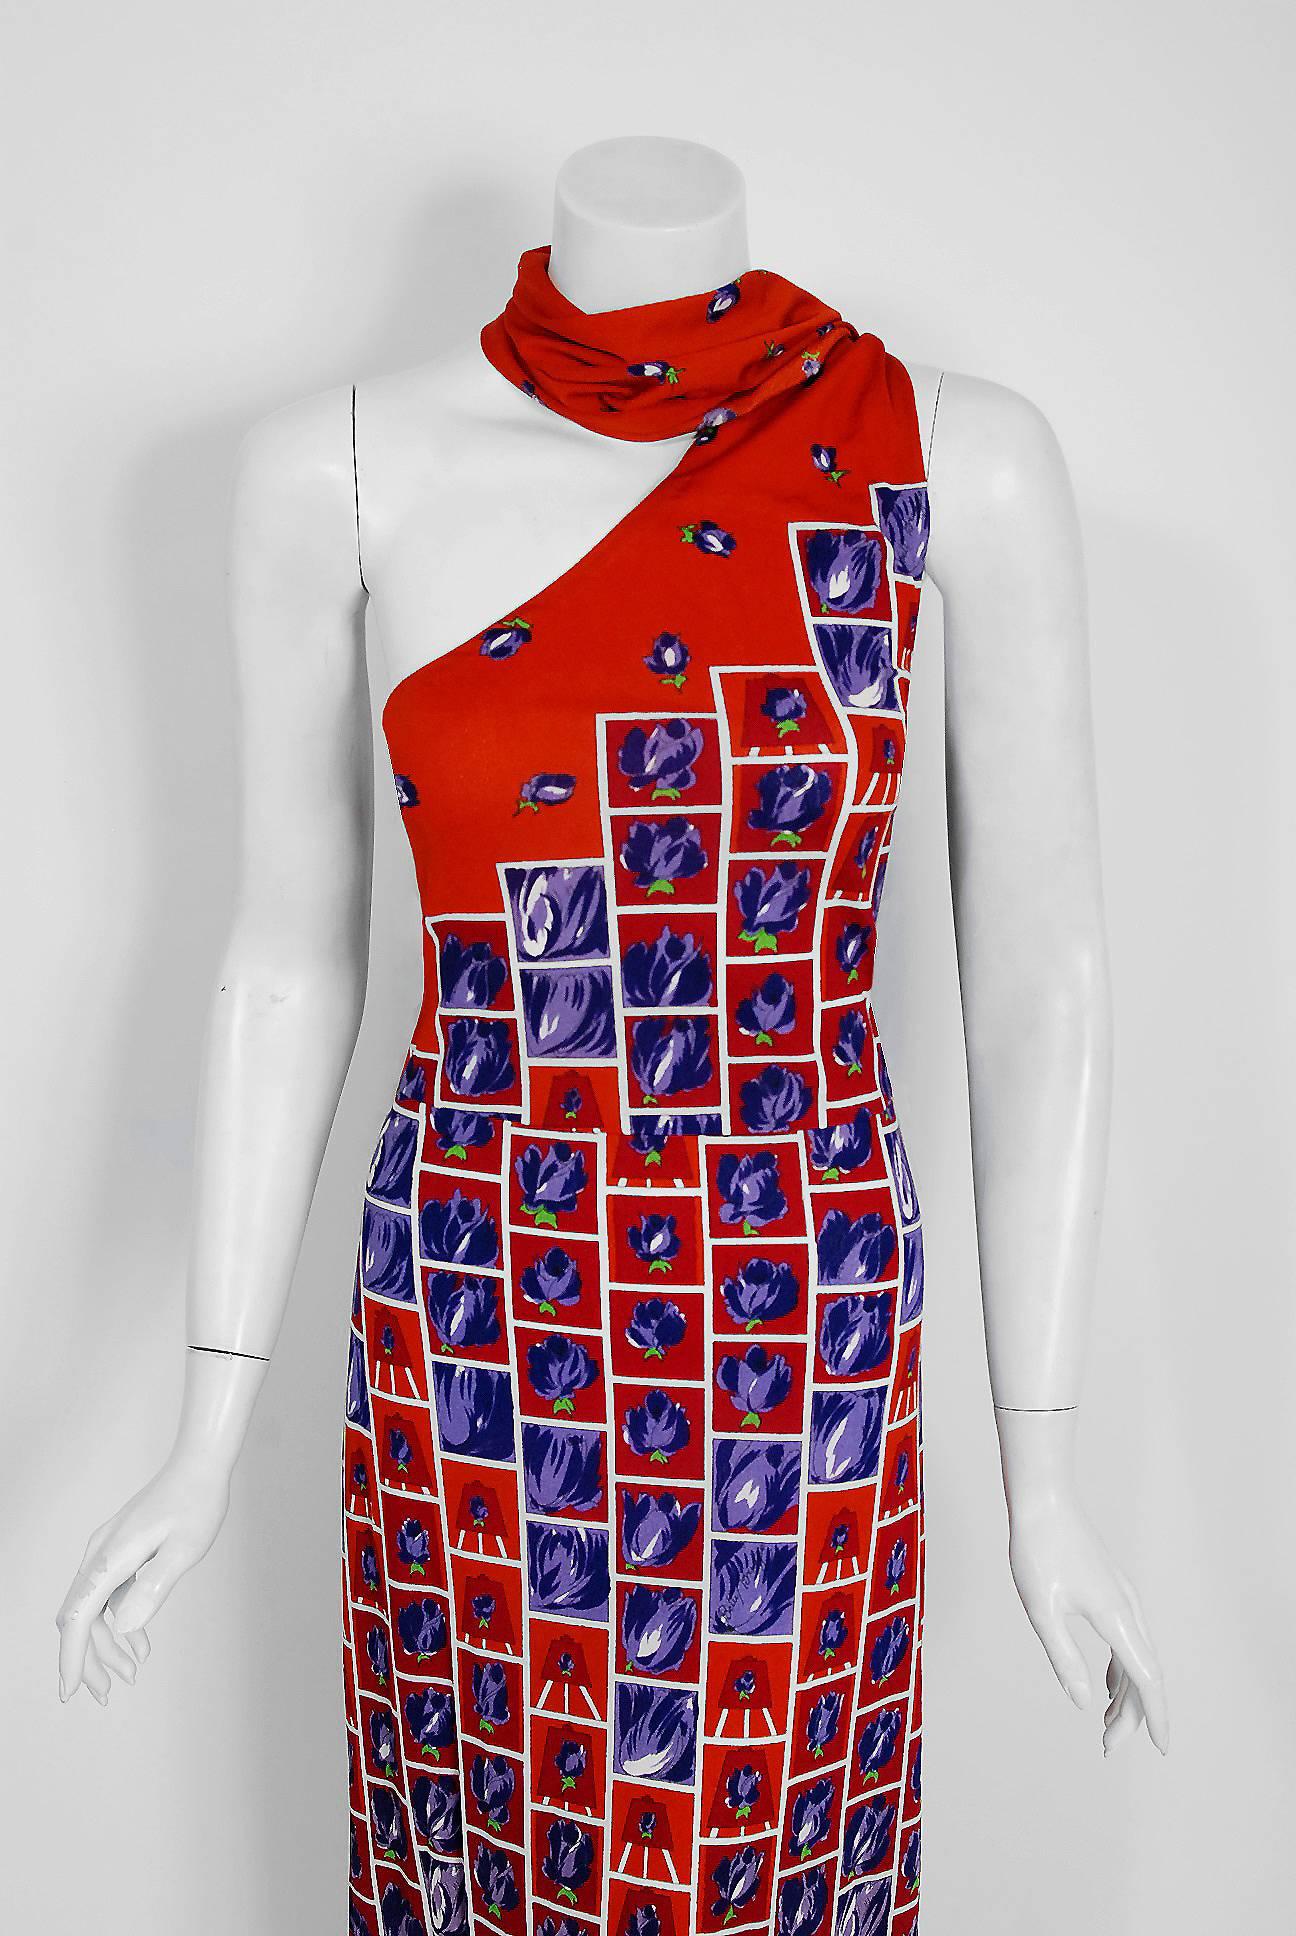 With its vibrant purple-roses graphic print and flawless styling, this Italian jersey dress has the bohemian elegance the 1970's were known for. The asymmetric one-shoulder scarf bodice is very flattering and effortless to wear. The nipped waistline